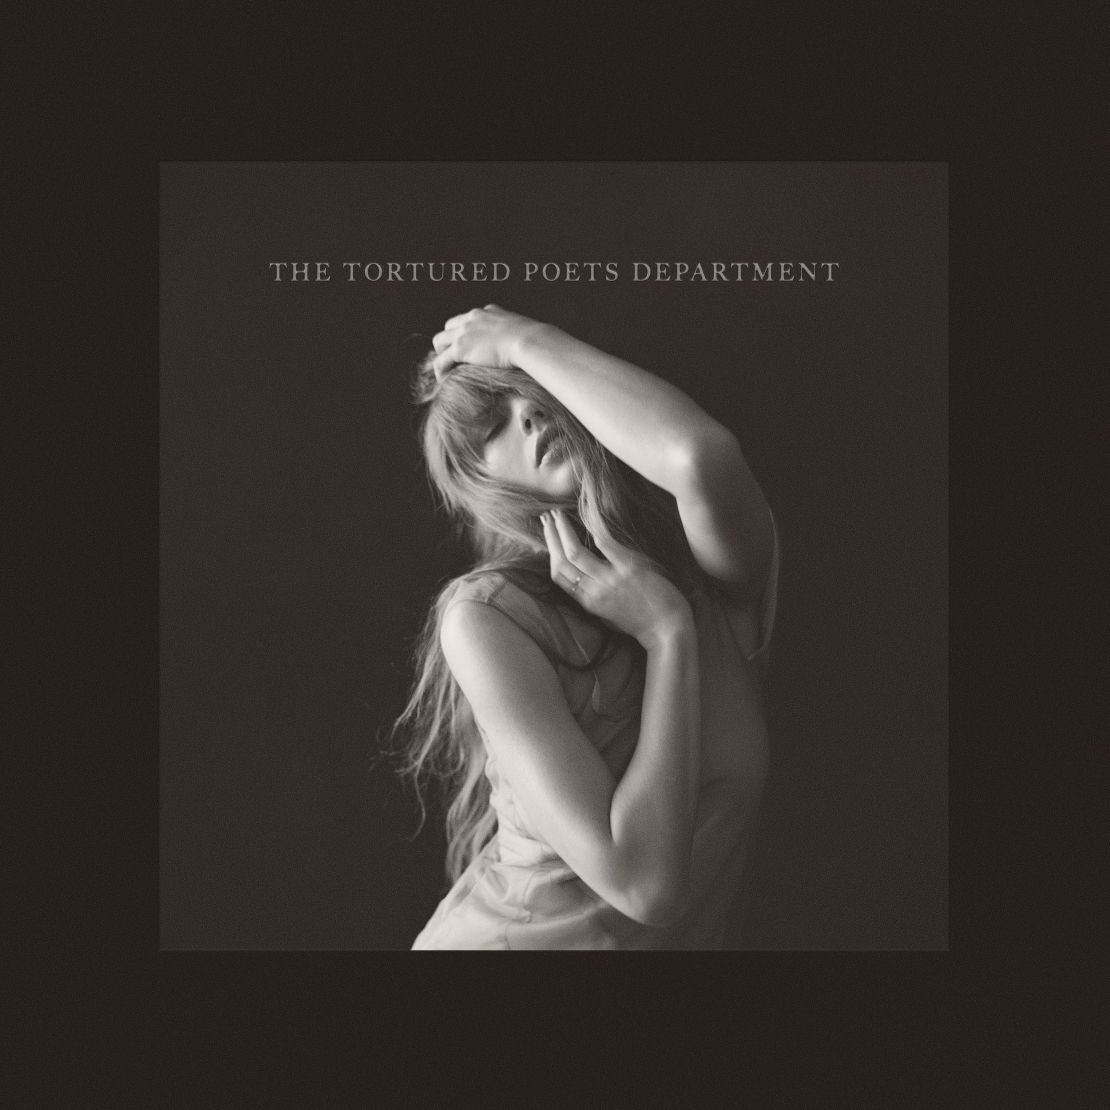 The cover of Taylor Swift's 'The Tortured Poets Department: The Anthology' double album released Friday.